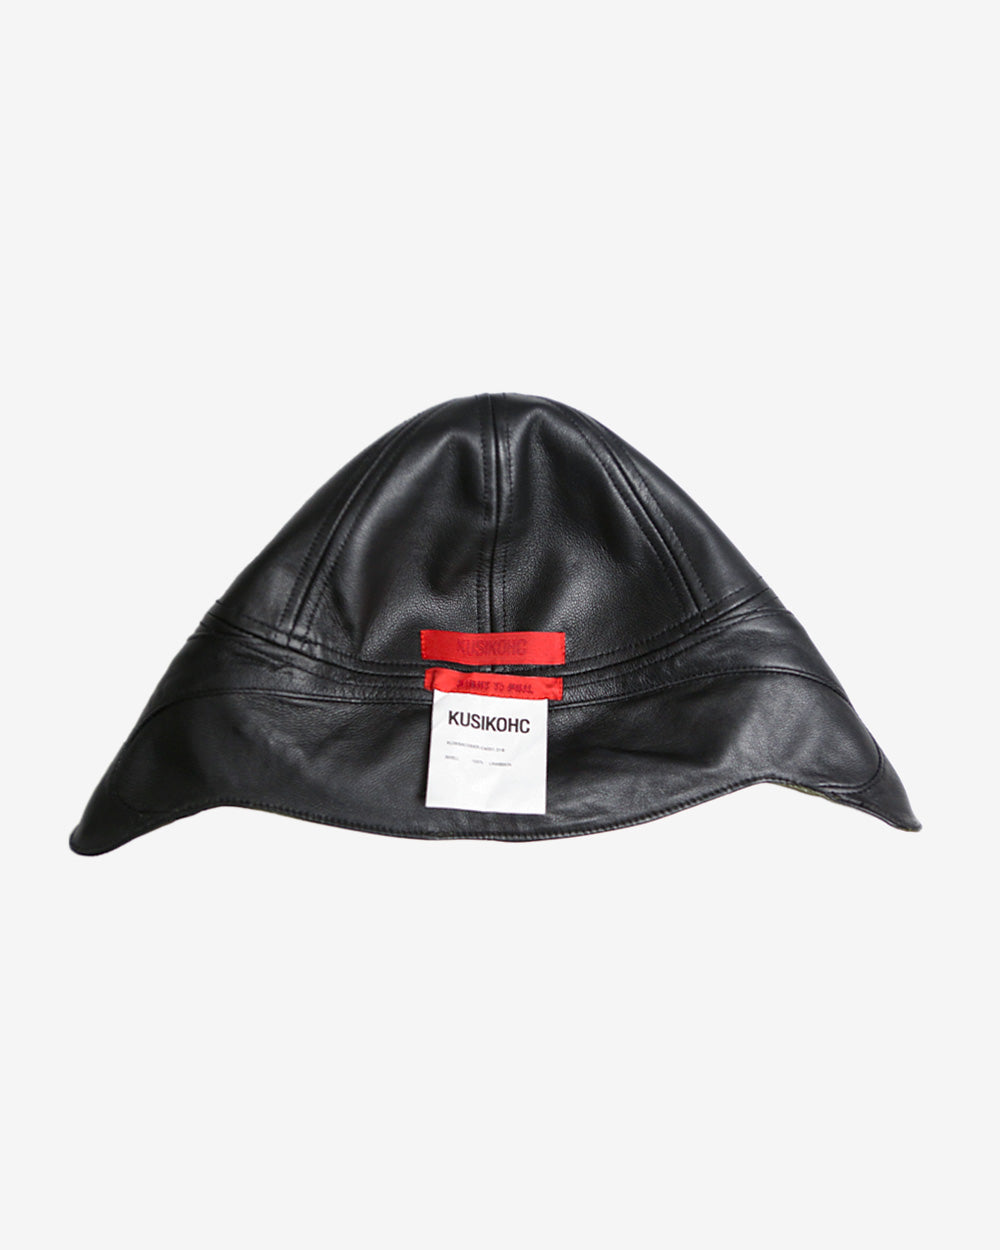 RIGHT TO FAIL REVERSIBLE LEATHER AVIATOR HAT